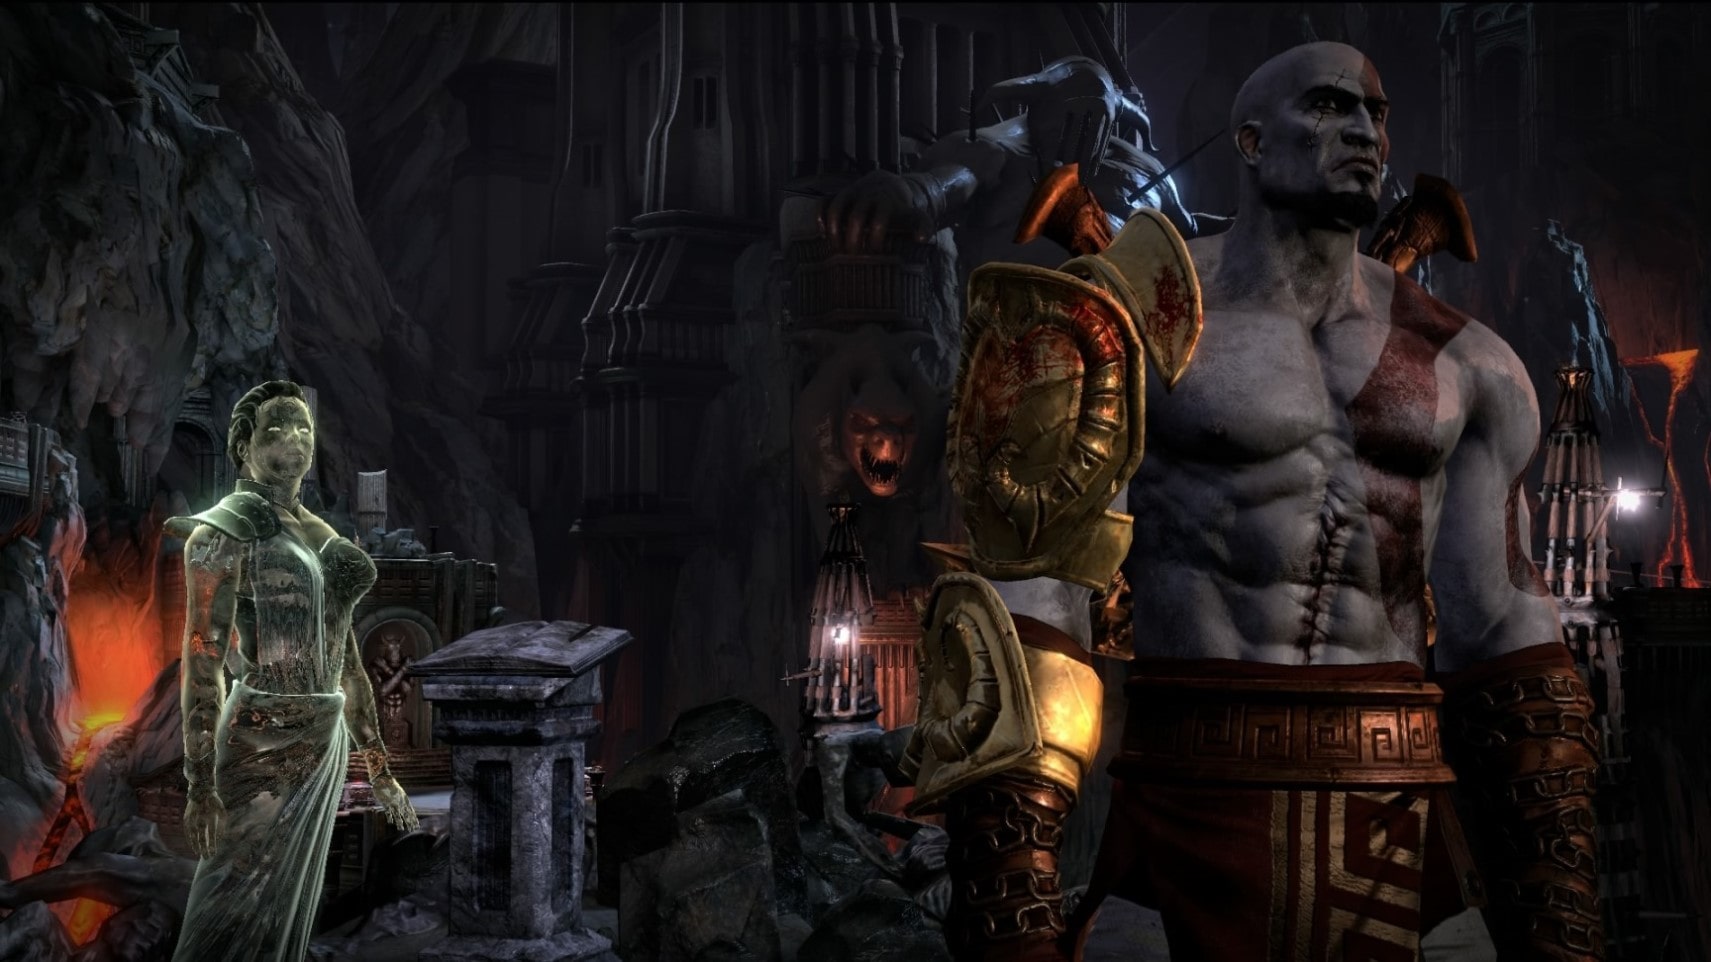 god of war 3 for ps4